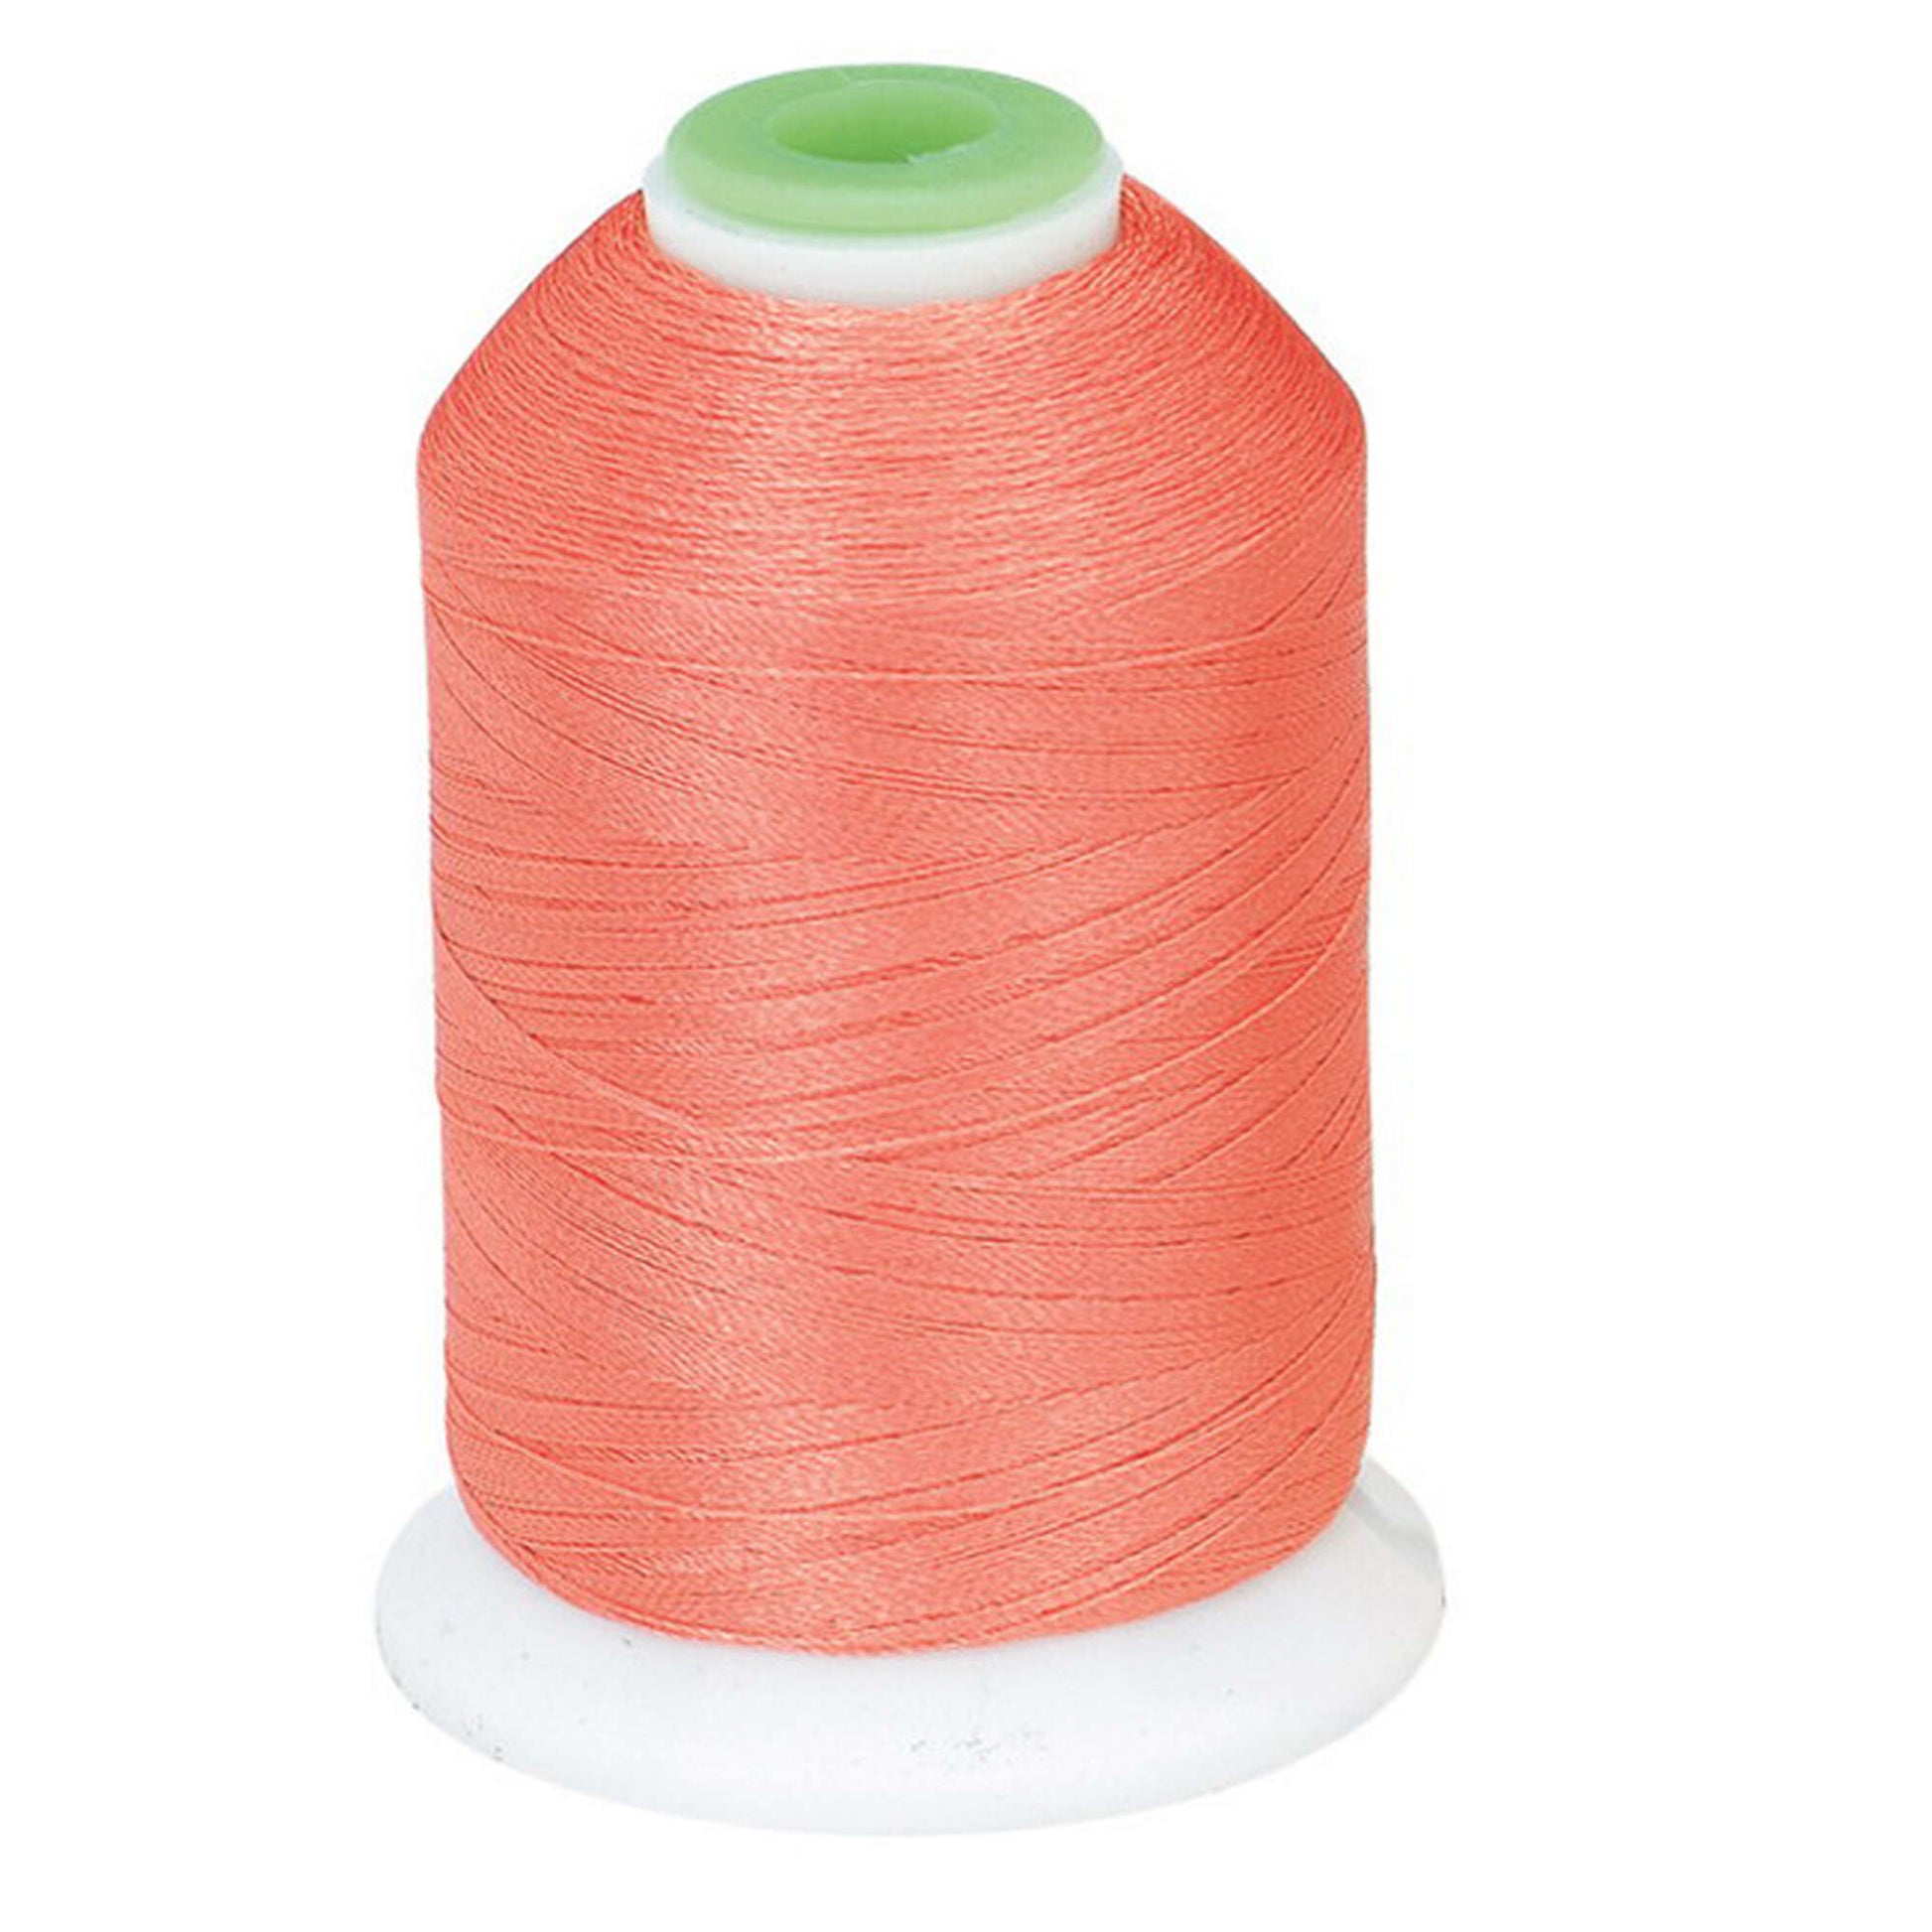 Coats & Clark Machine Embroidery Thread 1100 yds, Hot Coral